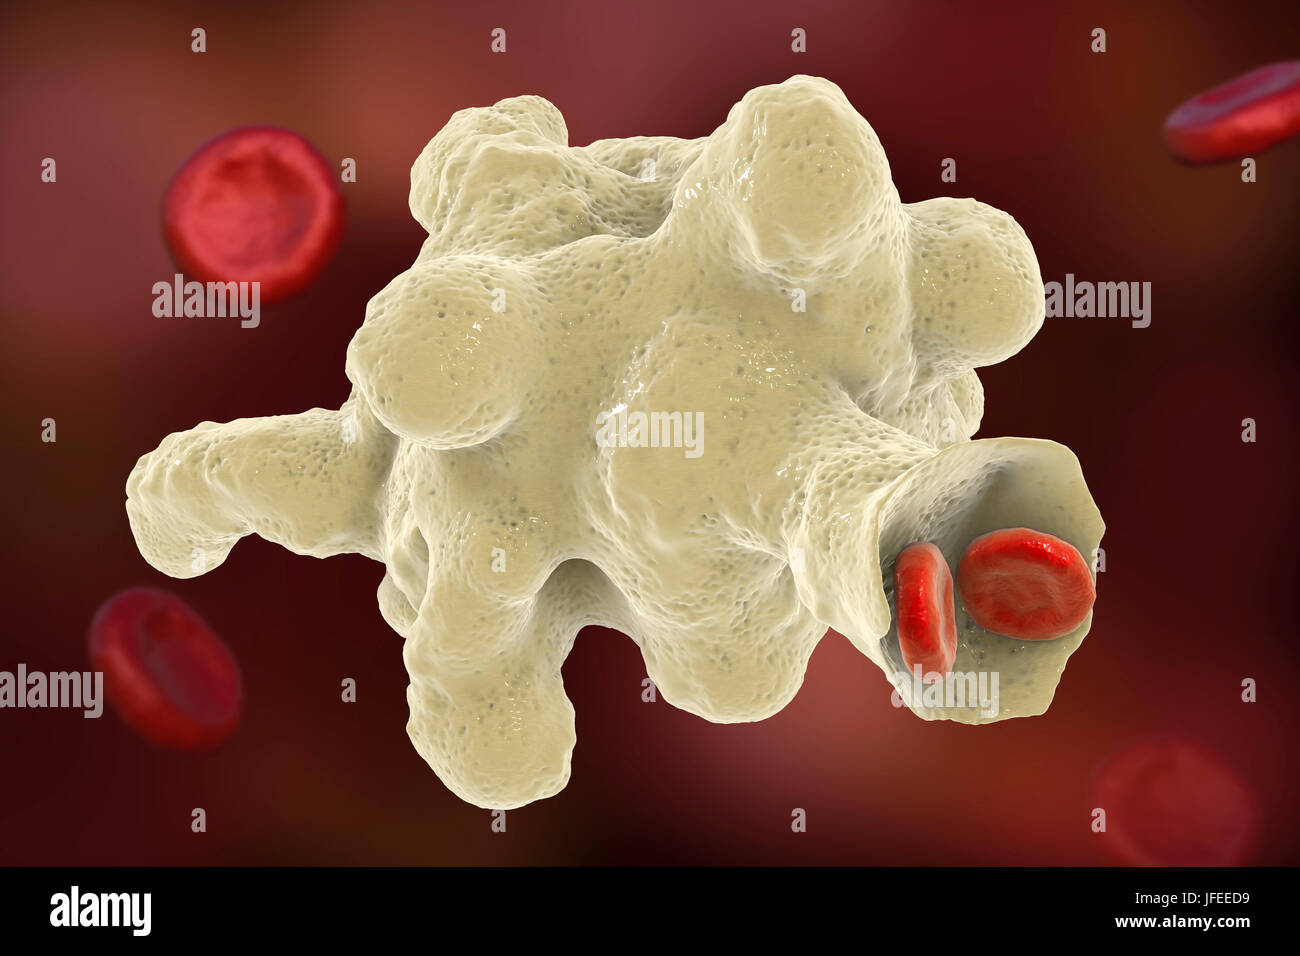 Parasitic amoeba (Entamoeba histolytica) engulfing red blood cells, computer illustration. This single-celled organism causes amoebic dysentery and ulcers (vegetative trophozoite stage). It is spread by faecal contamination of food and water and is most common where sanitation is poor. Amoebae invade the intestine but may spread to the liver, lungs and other tissues. Infection is caused by the ingestion of cysts that develop into the pathogenic trophozoite amoeba seen here. Entamoeba histolytica occurs worldwide, with up to 50% of the population being infected primarily in warmer climates. Stock Photo